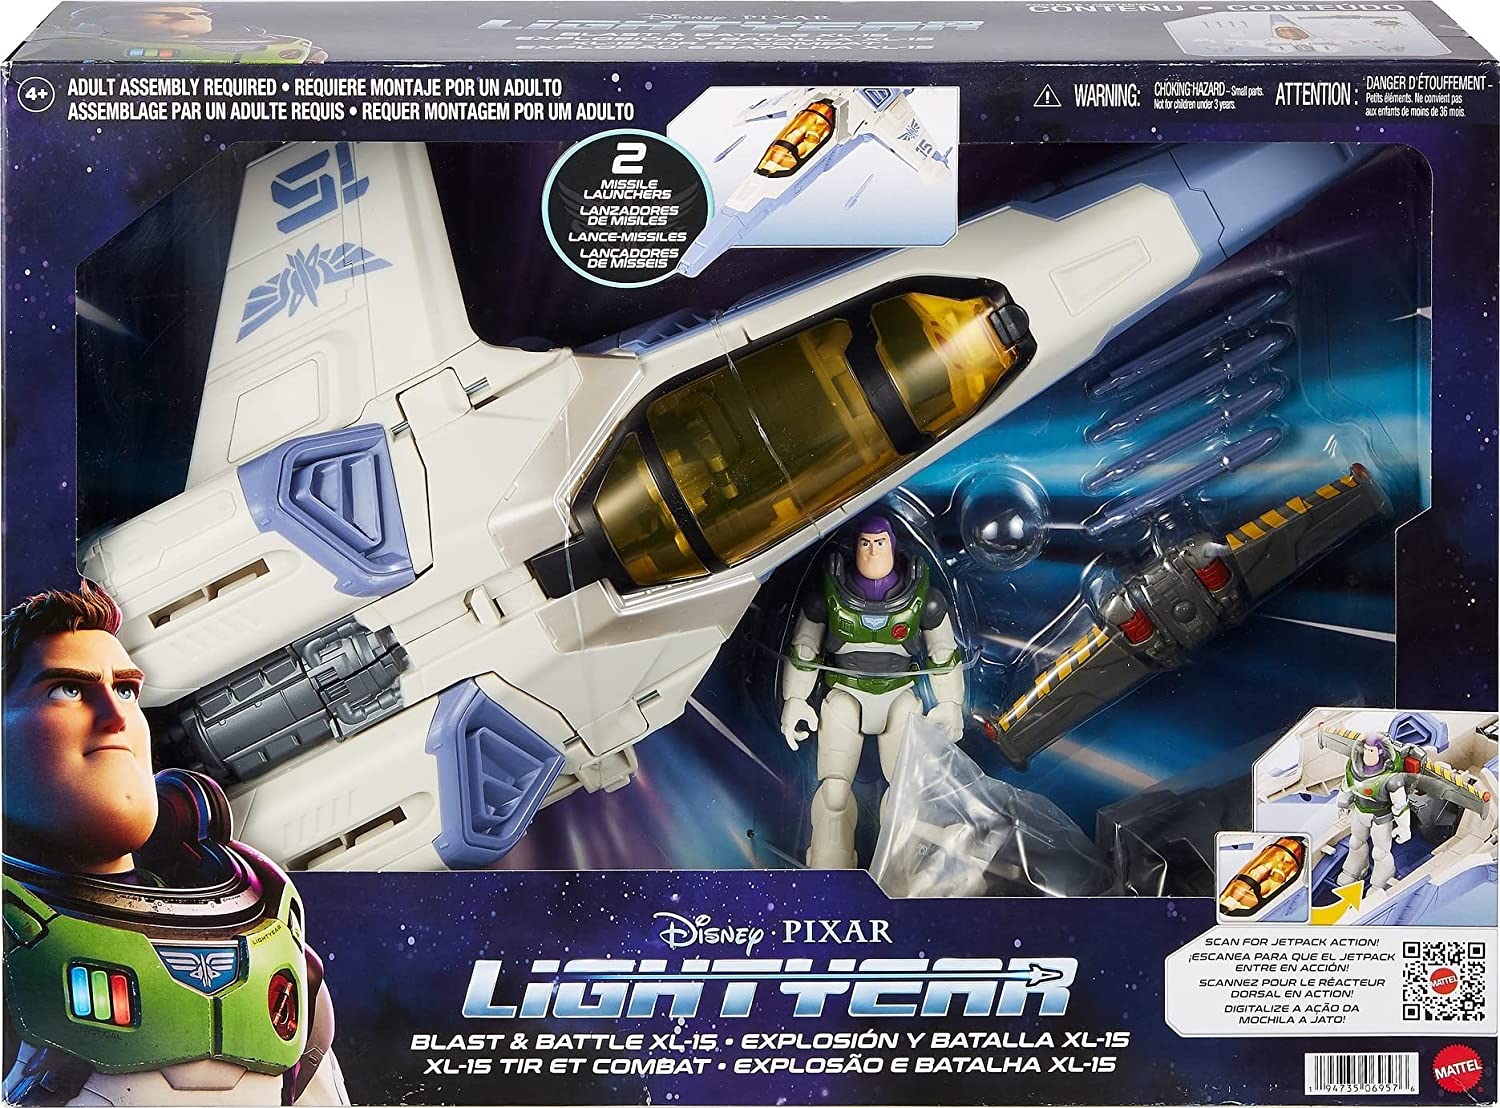 Disney and Pixar Buzz Lightyear Figure with Blast and Battle XL15 Spaceship Collectible Set